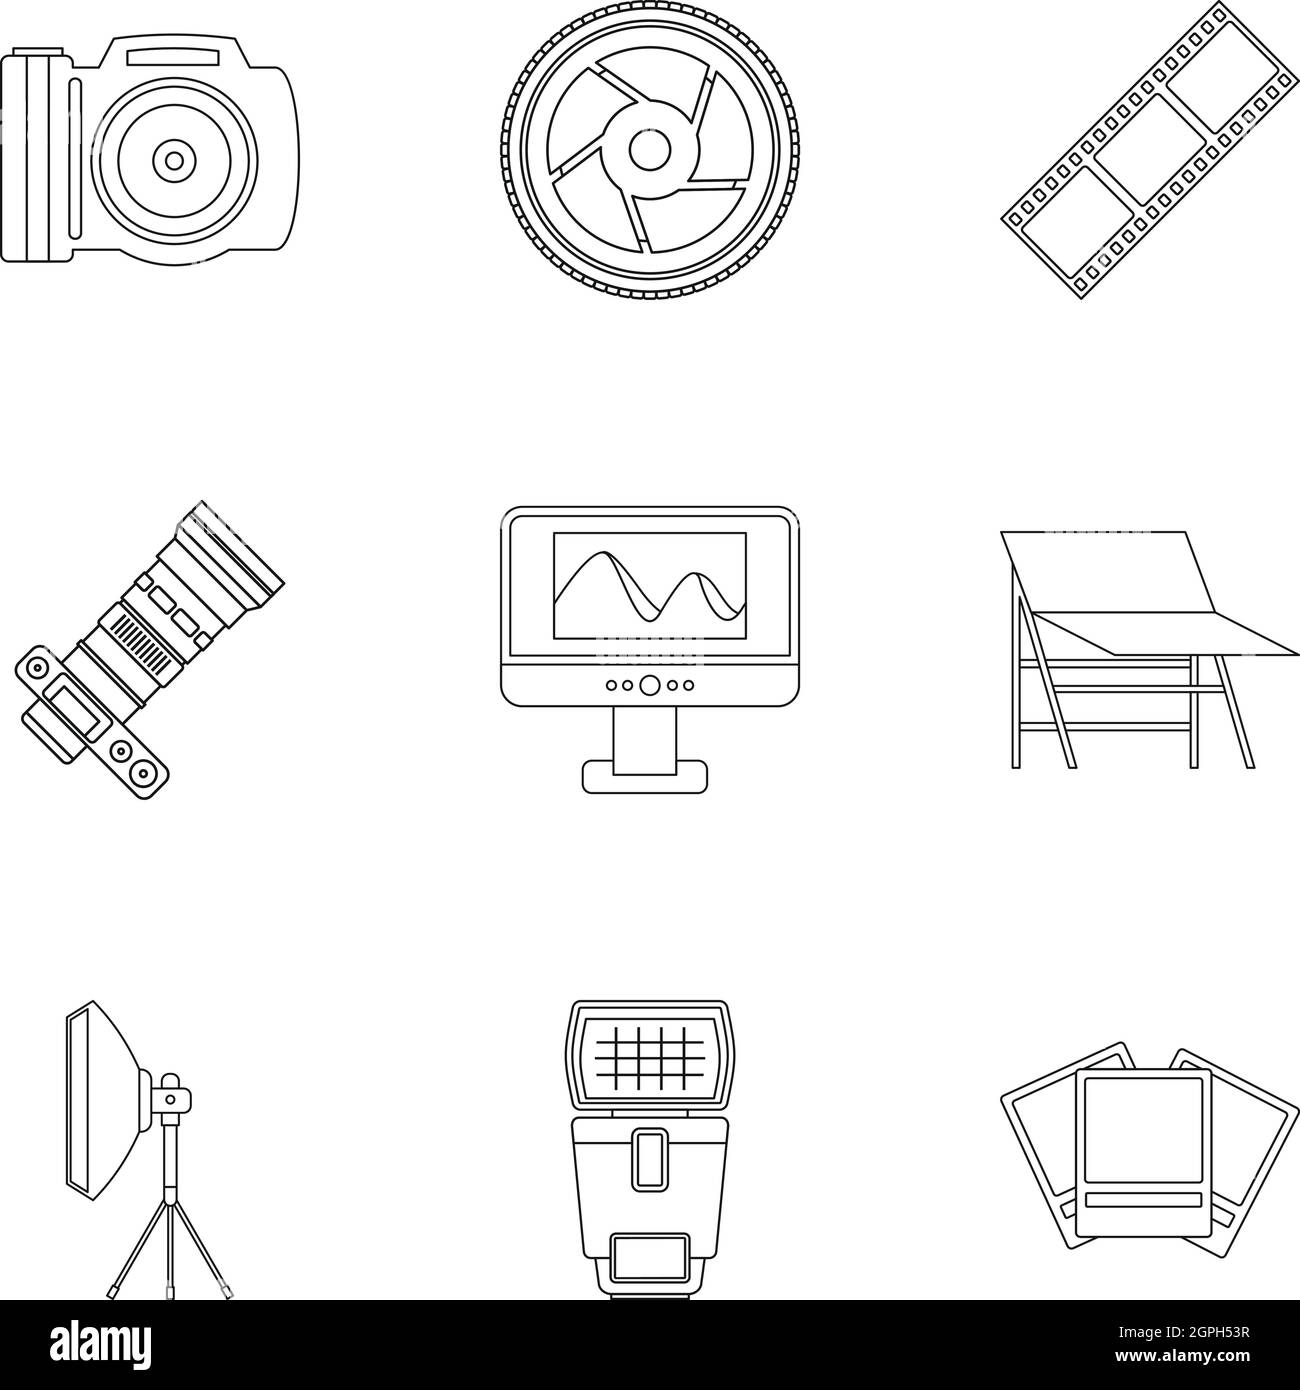 Camera Accessories Drawing Icons Stock Vector - Illustration of